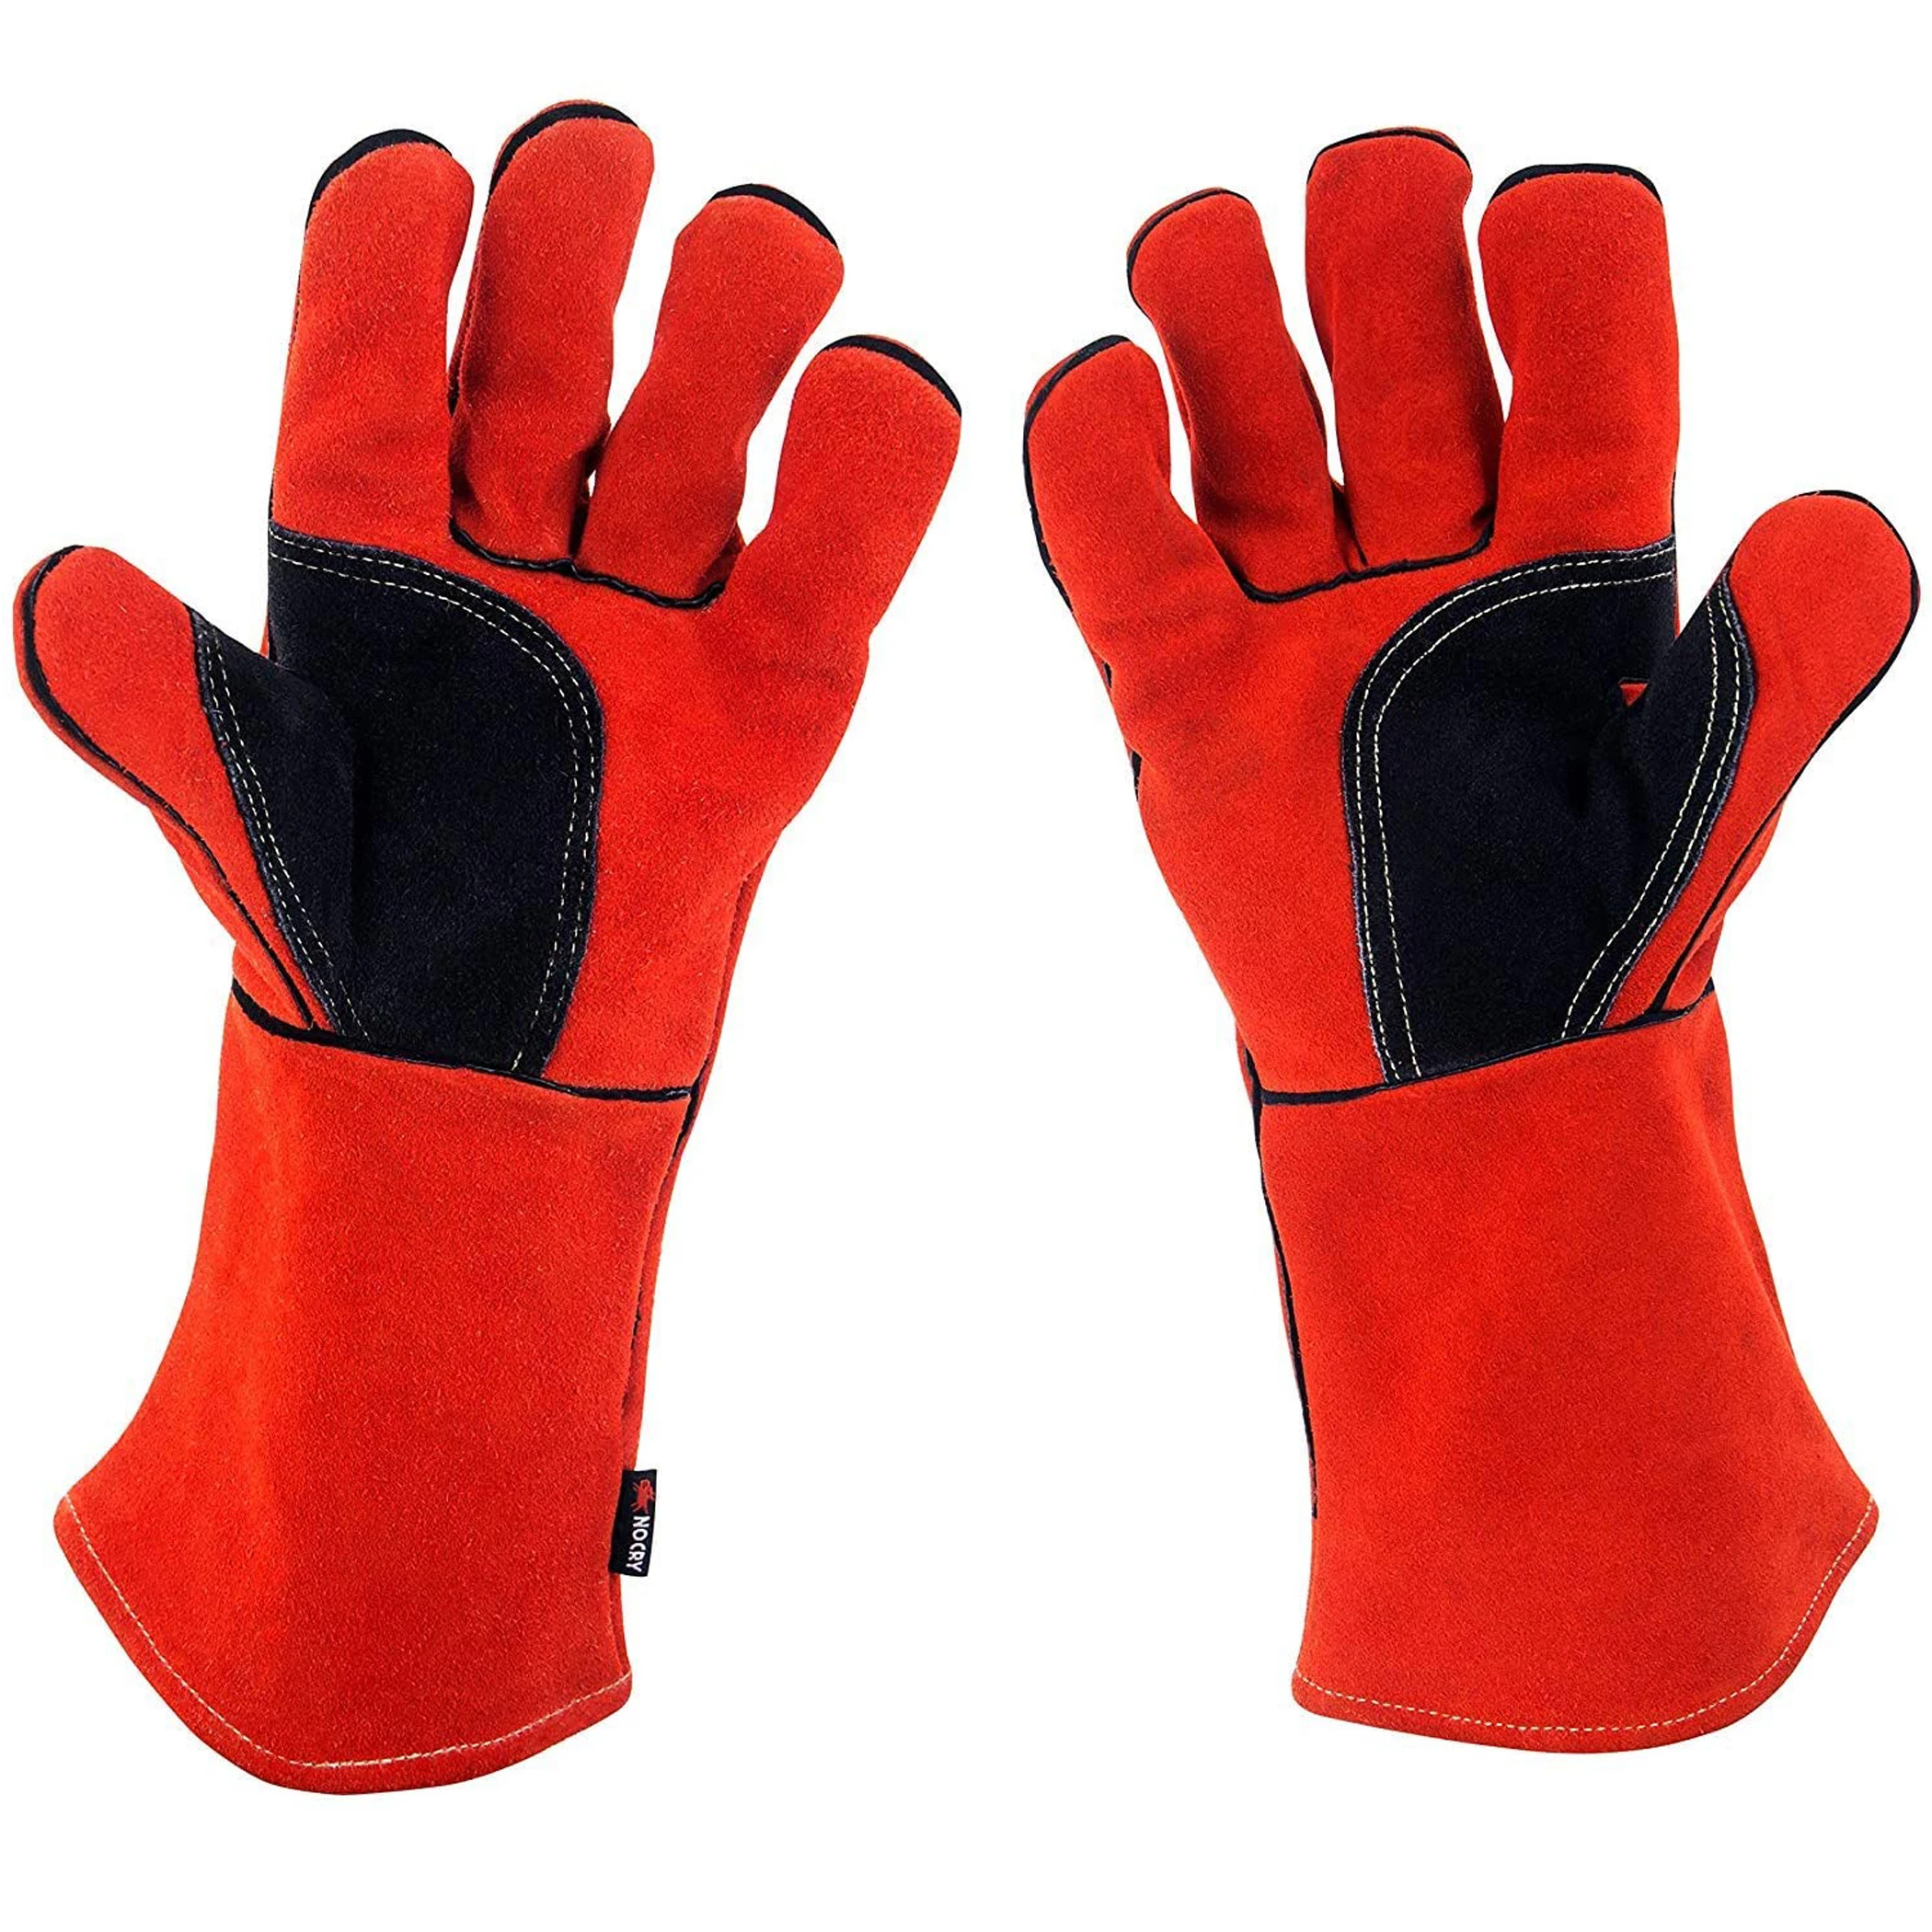 PK safety gloves welding gloves made of cow split leather reinforced double layered palm Working Gloves